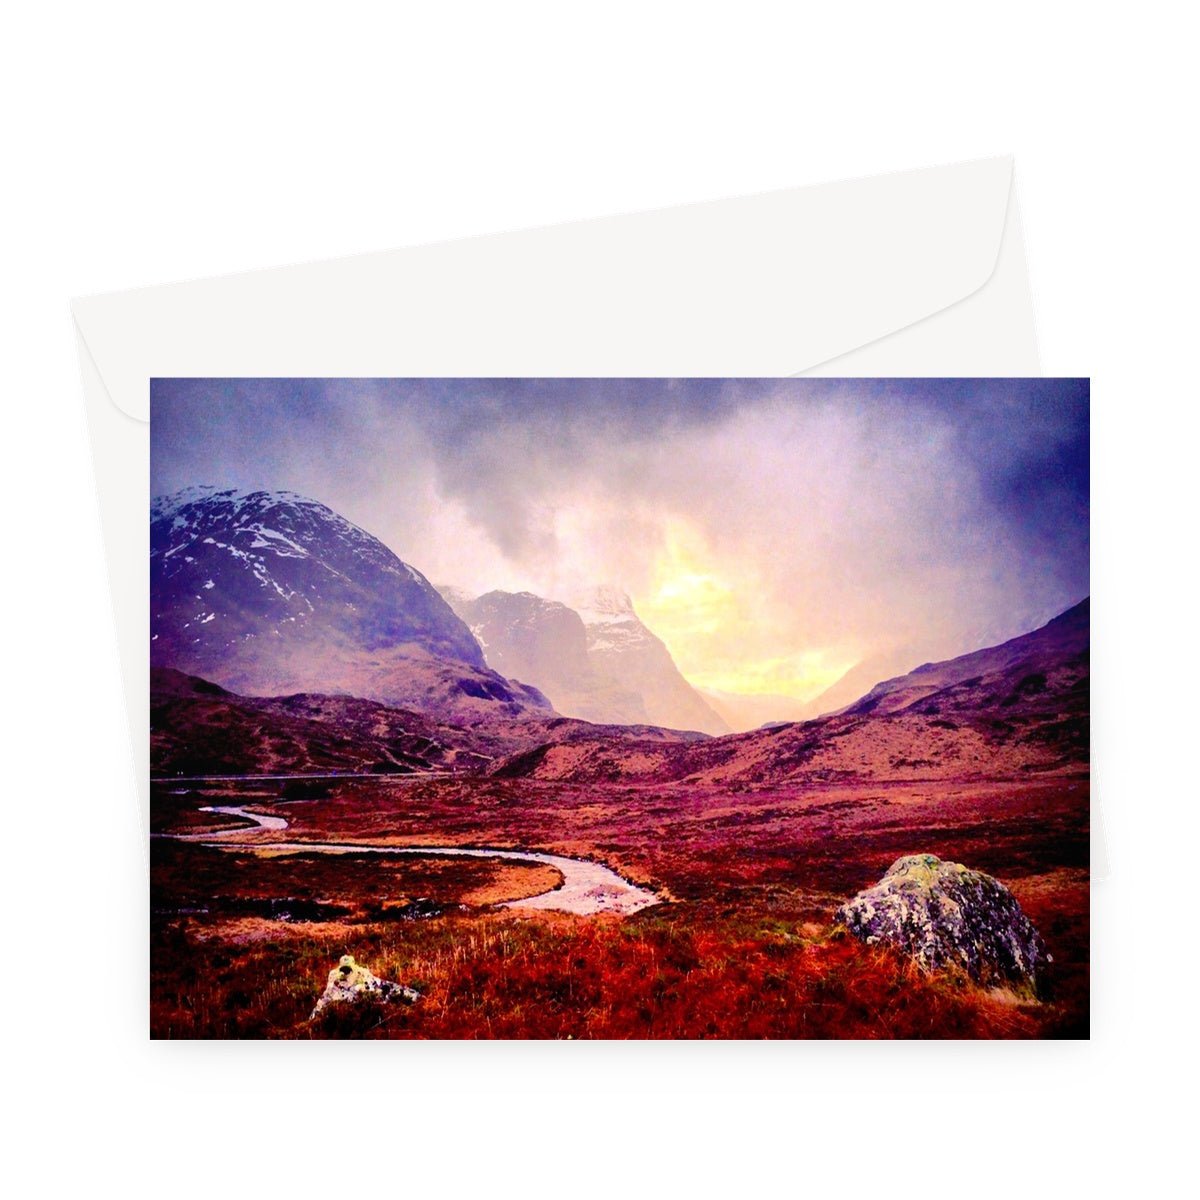 A Brooding Glencoe Art Gifts Greeting Card-Greetings Cards-Glencoe Art Gallery-A5 Landscape-1 Card-Paintings, Prints, Homeware, Art Gifts From Scotland By Scottish Artist Kevin Hunter